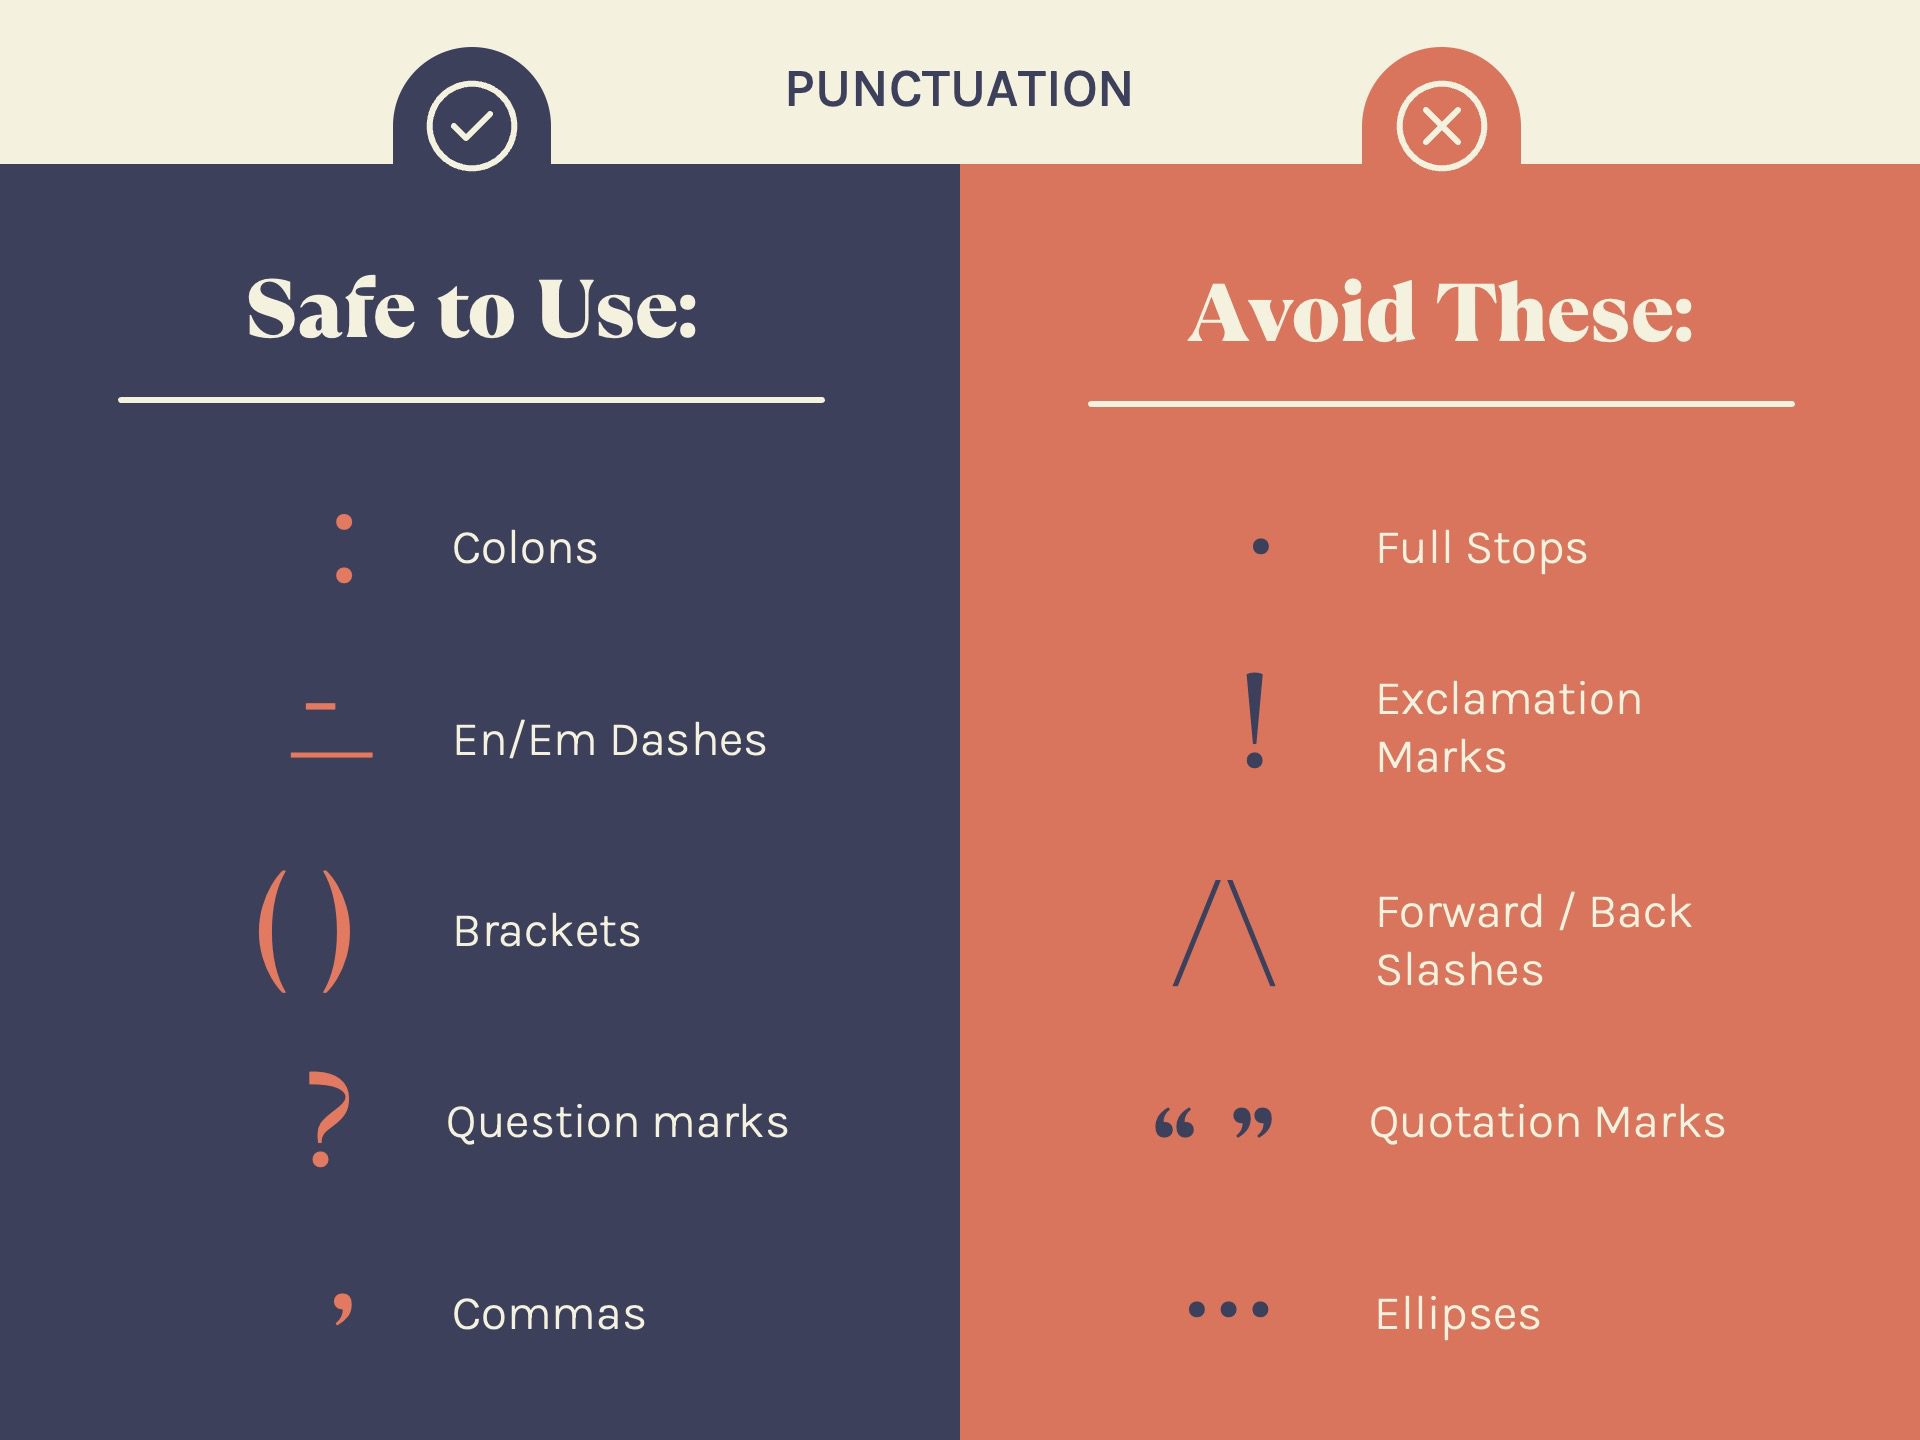 What Punctuation to avoid in Presentation Titles